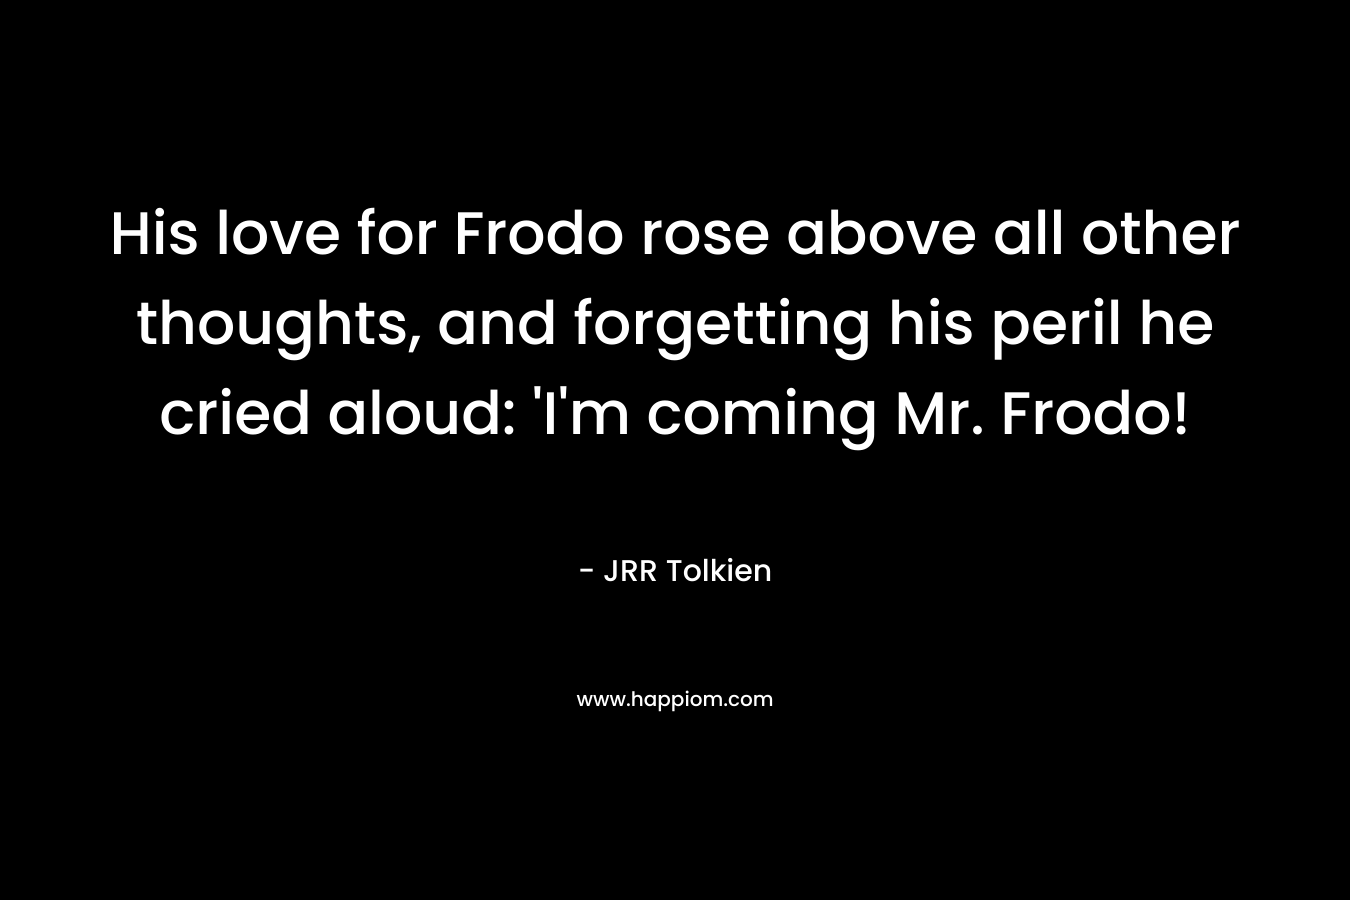 His love for Frodo rose above all other thoughts, and forgetting his peril he cried aloud: 'I'm coming Mr. Frodo!